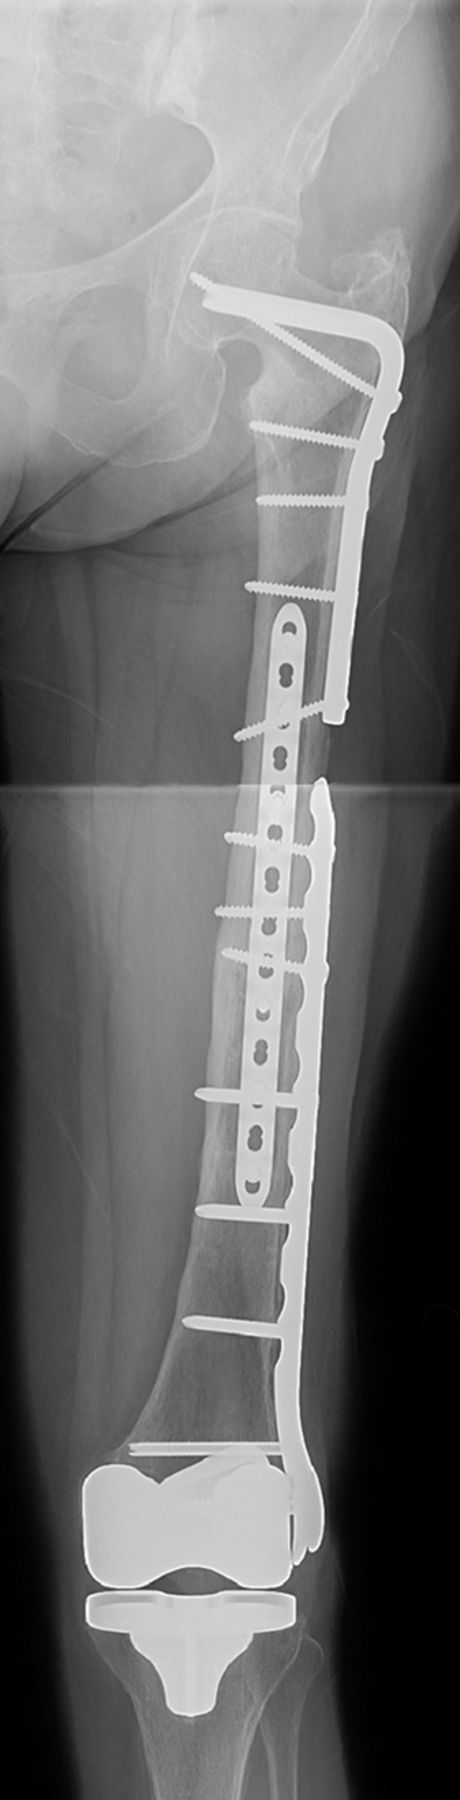 Fig. 1 
          Anteroposterior radiograph of
left femur showing orthogonal plate fixation of a patient with an
interprosthetic femoral fracture between a stable total knee arthroplasty
and proximal blade plate. The fracture was treated with a distal
lateral femoral locking plate, and anterior small fragment locking
plate to protect the lateral inter-plate distance. This image was
obtained at a six month post-operative visit and shows uneventful
union.
        